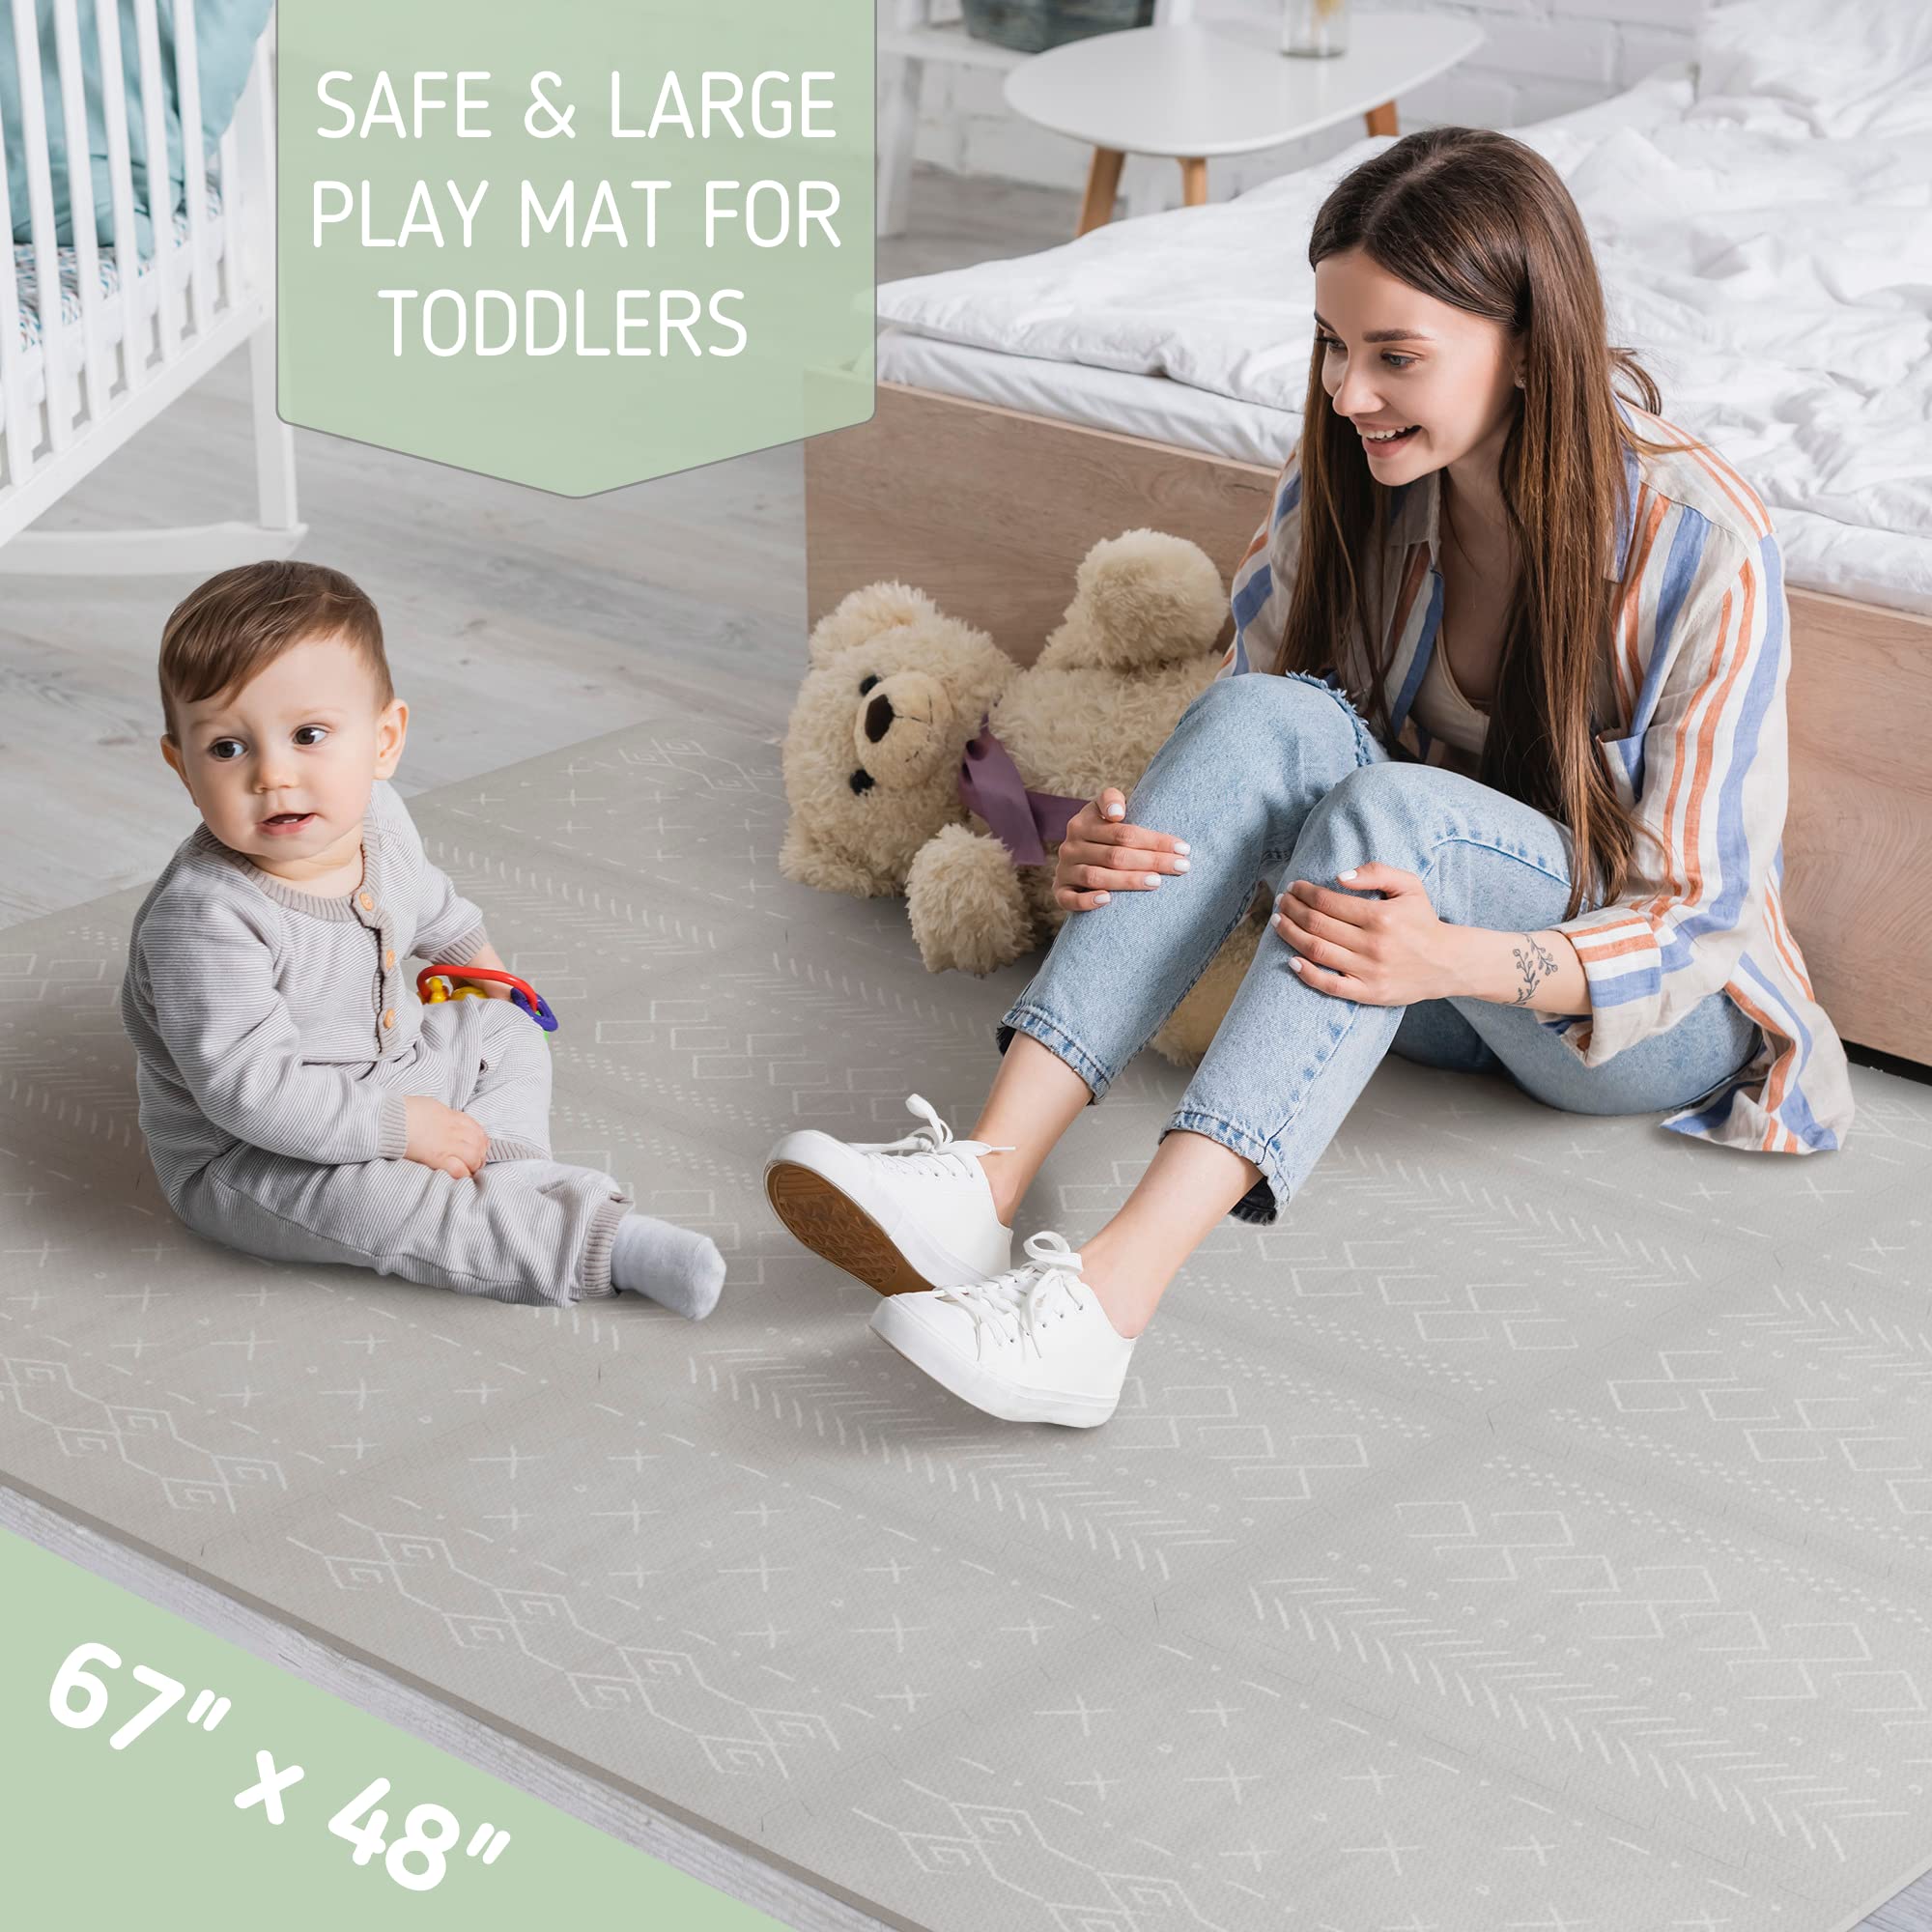 Stylish Baby Play Mat - Soft, Easy to Clean 5.6 x 4 ft. Floor Mat Creates A Safe Play Area for Your Baby Boy or Girl - The Perfect Modern Foam Playmat Fits Nicely with Your Kids Playroom Or Home Decor